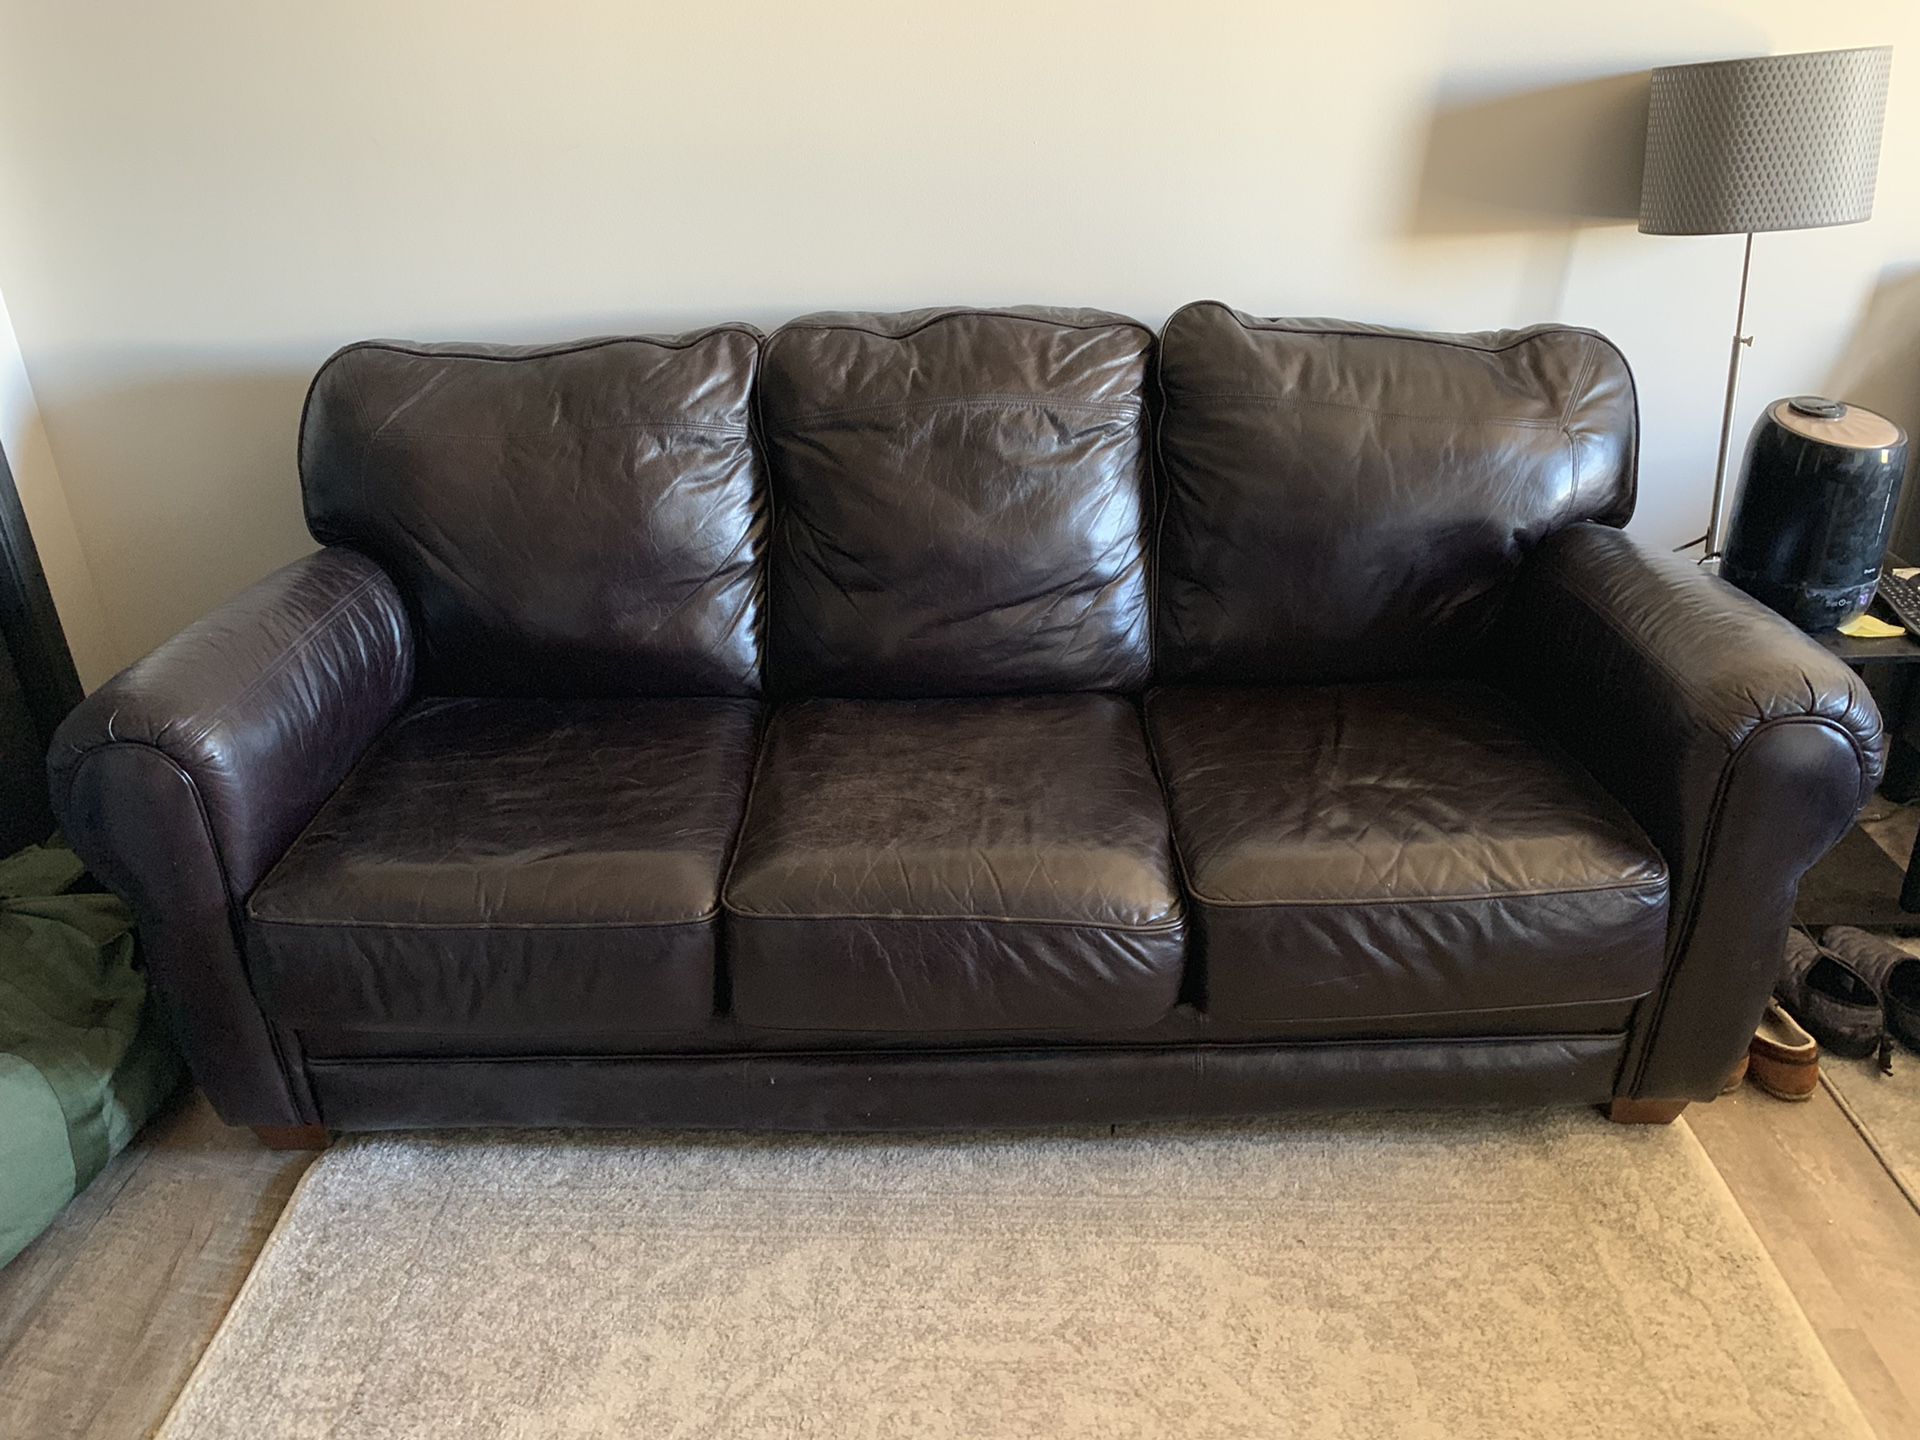 Leather couch- free this weekend. You haul